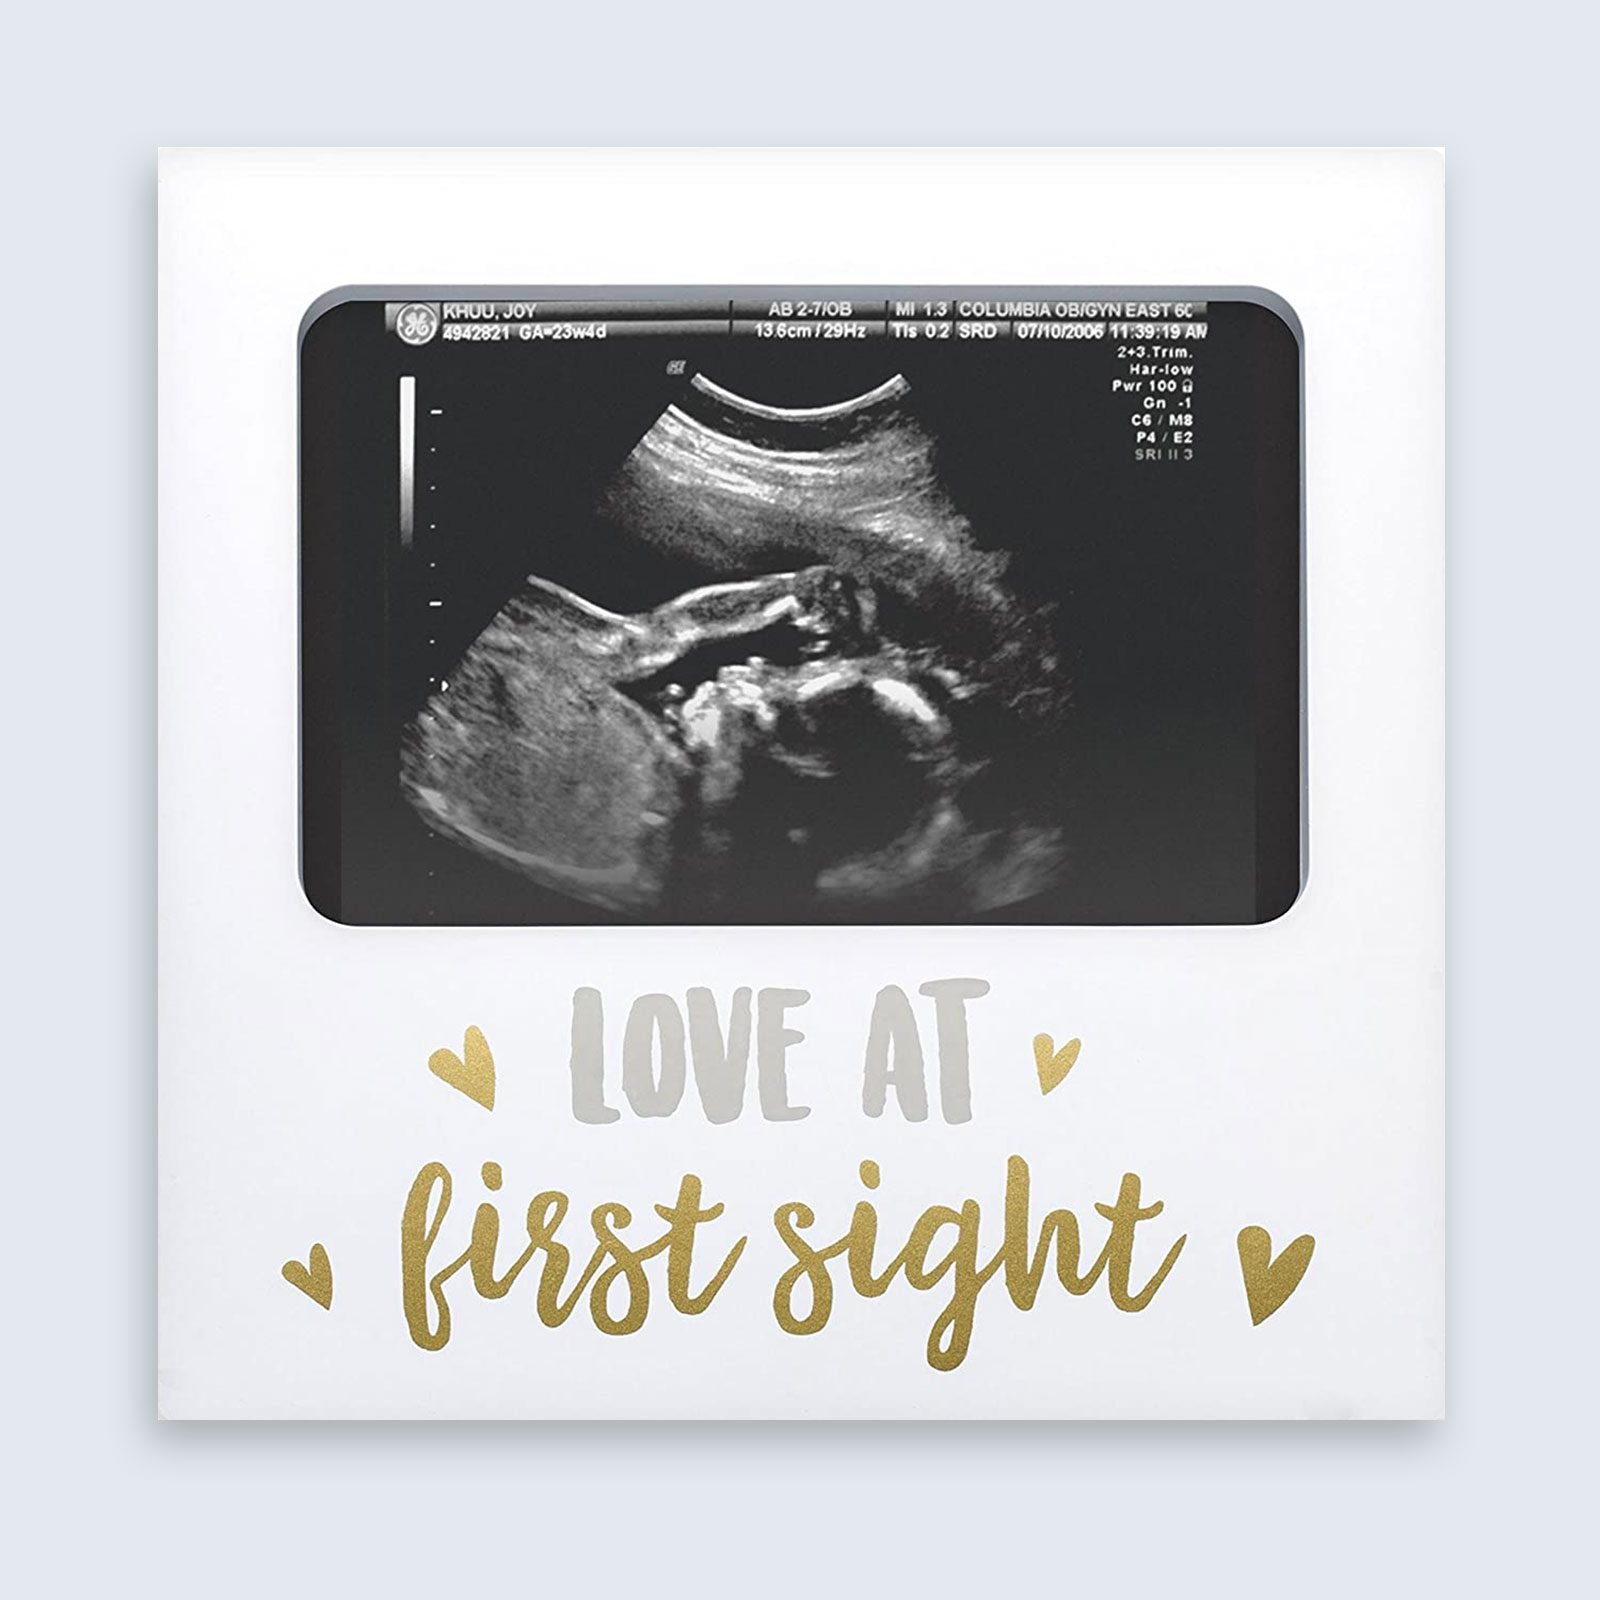 For the mom-to-be: Tiny Ideas Love at First Sight Sonogram Keepsake Photo Frame